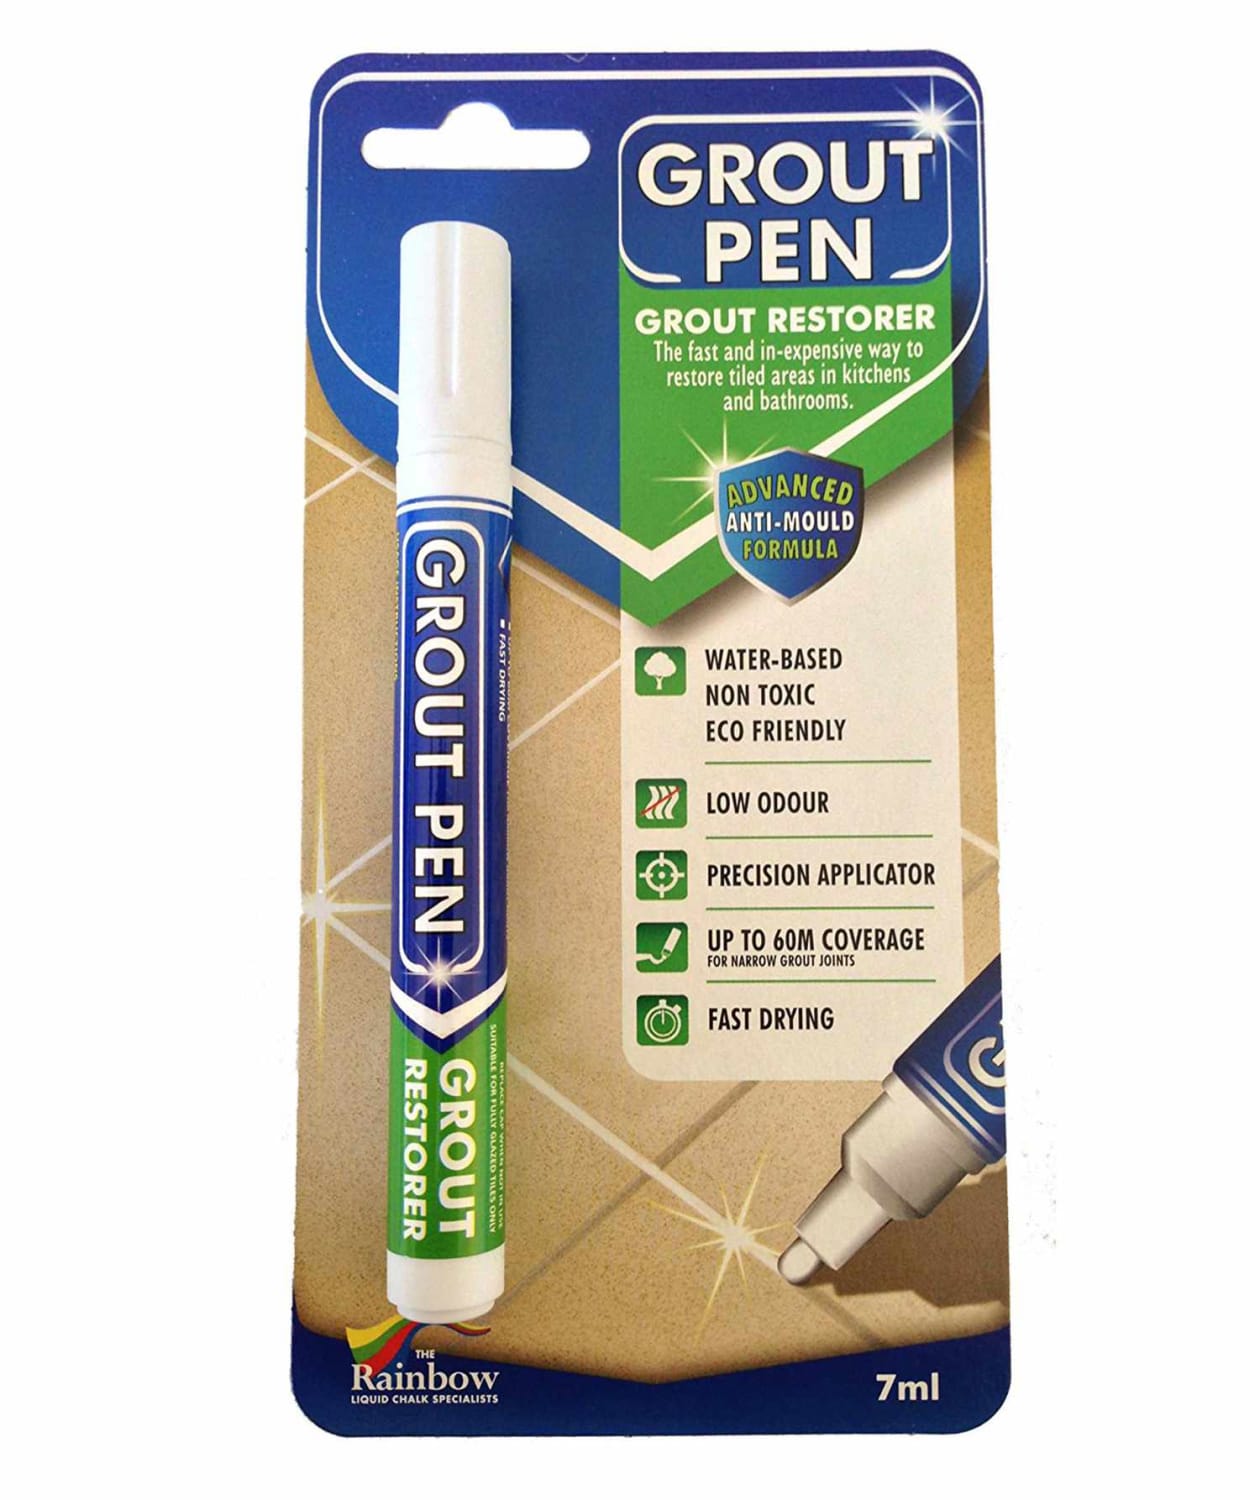 Proof That a $10 Grout Pen Is Capable of Transforming Your Entire Bathroom